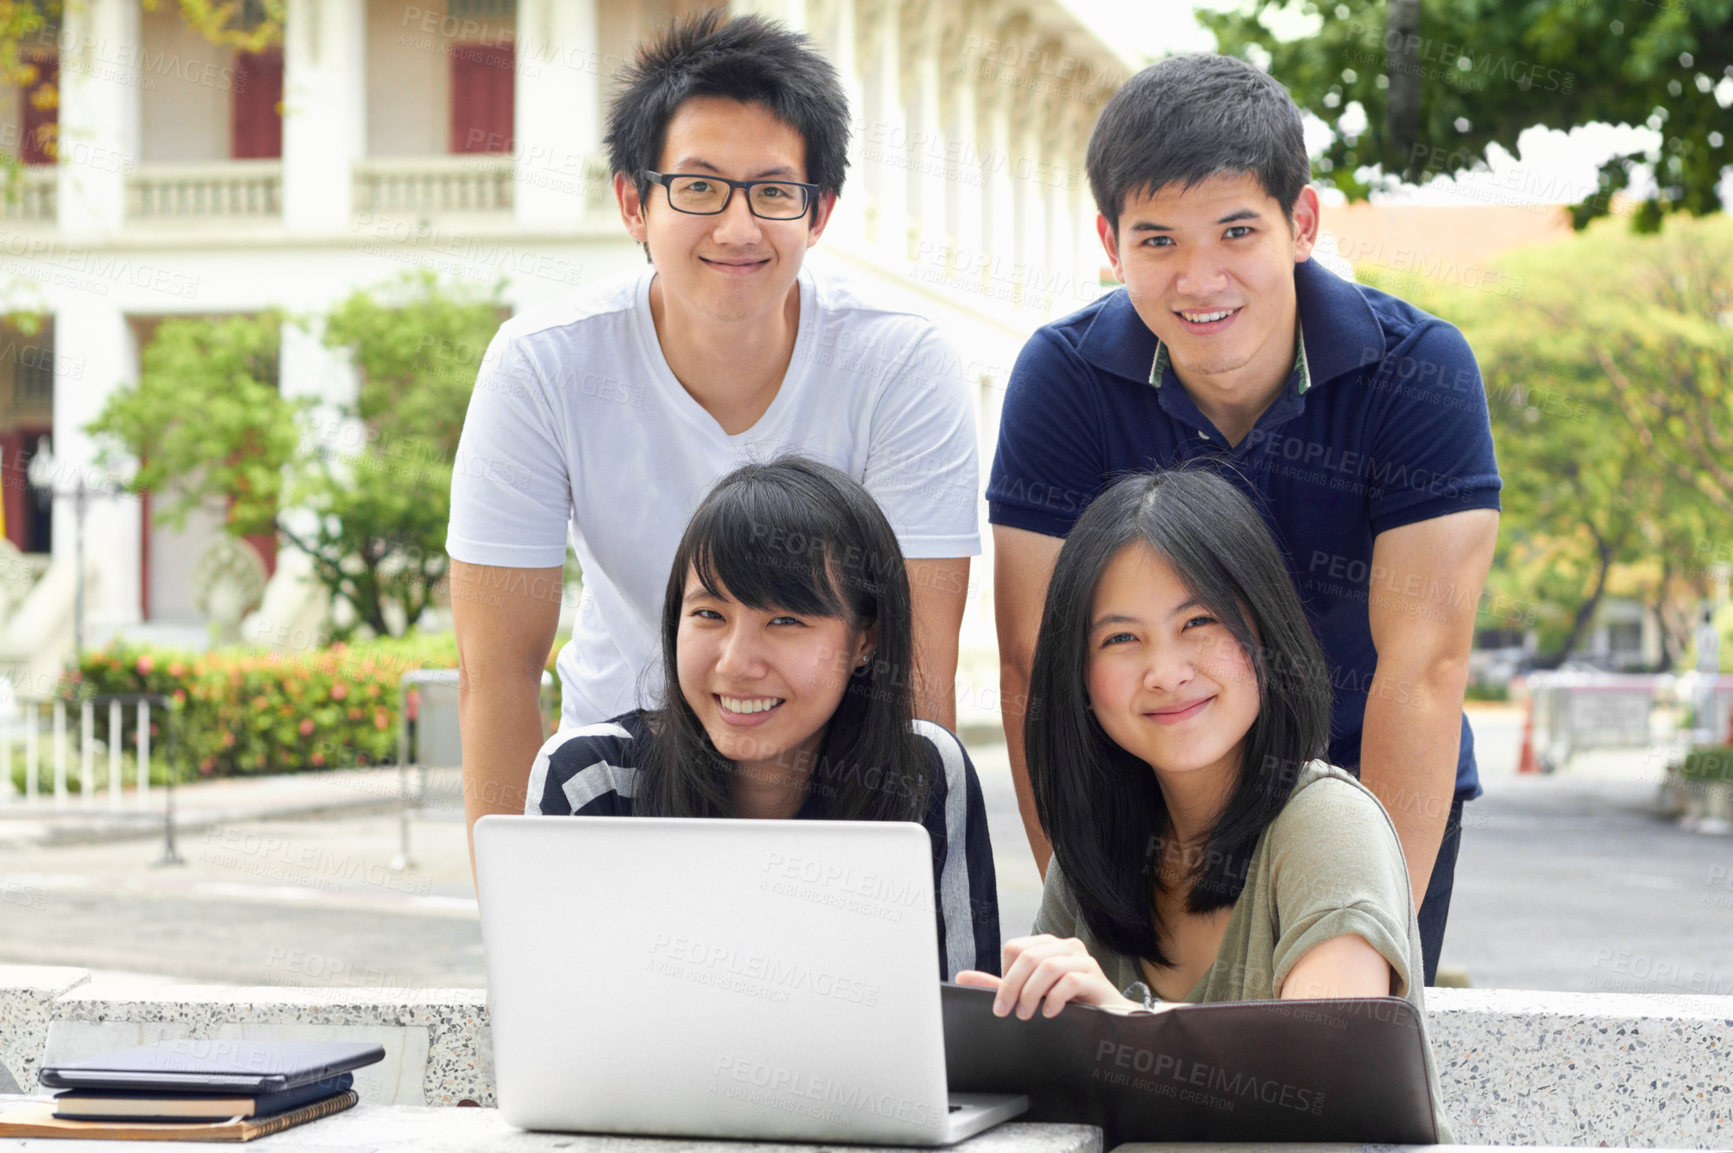 Buy stock photo Four young students sharing a laptop